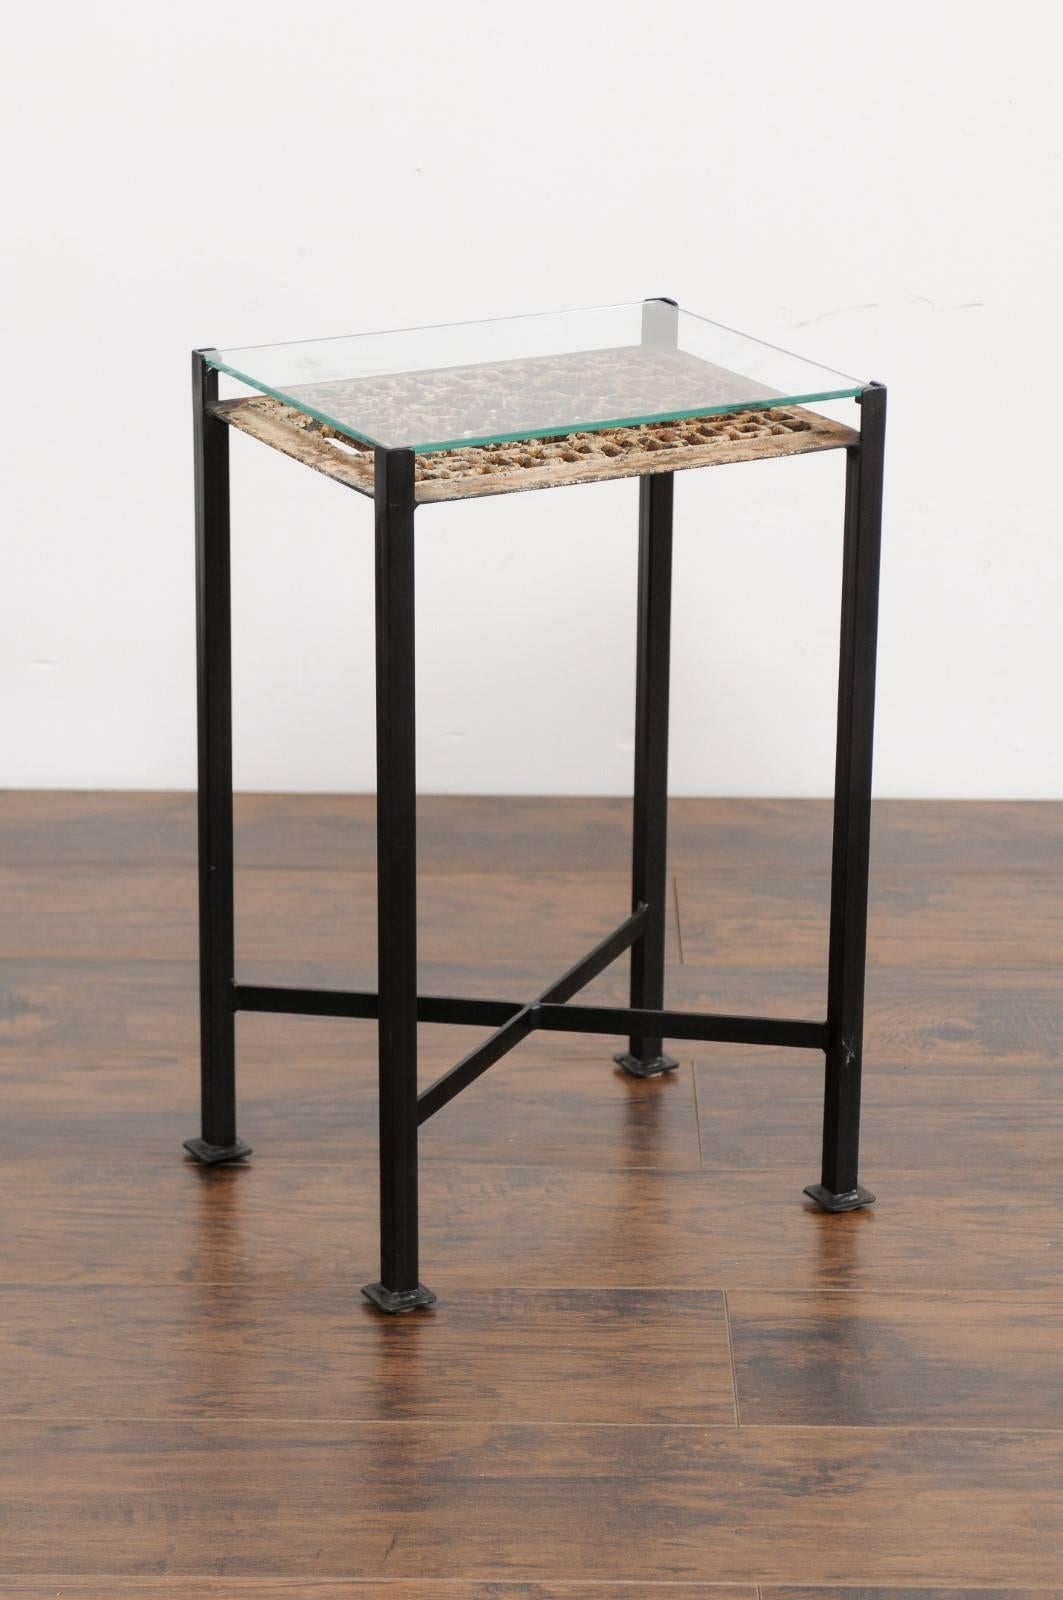 A small rectangular drink table made from a French decorative iron fretwork ornament from the first half of the 20th century, protected by a custom glass top and mounted on a 21st century custom base. This small drink table features a rectangular